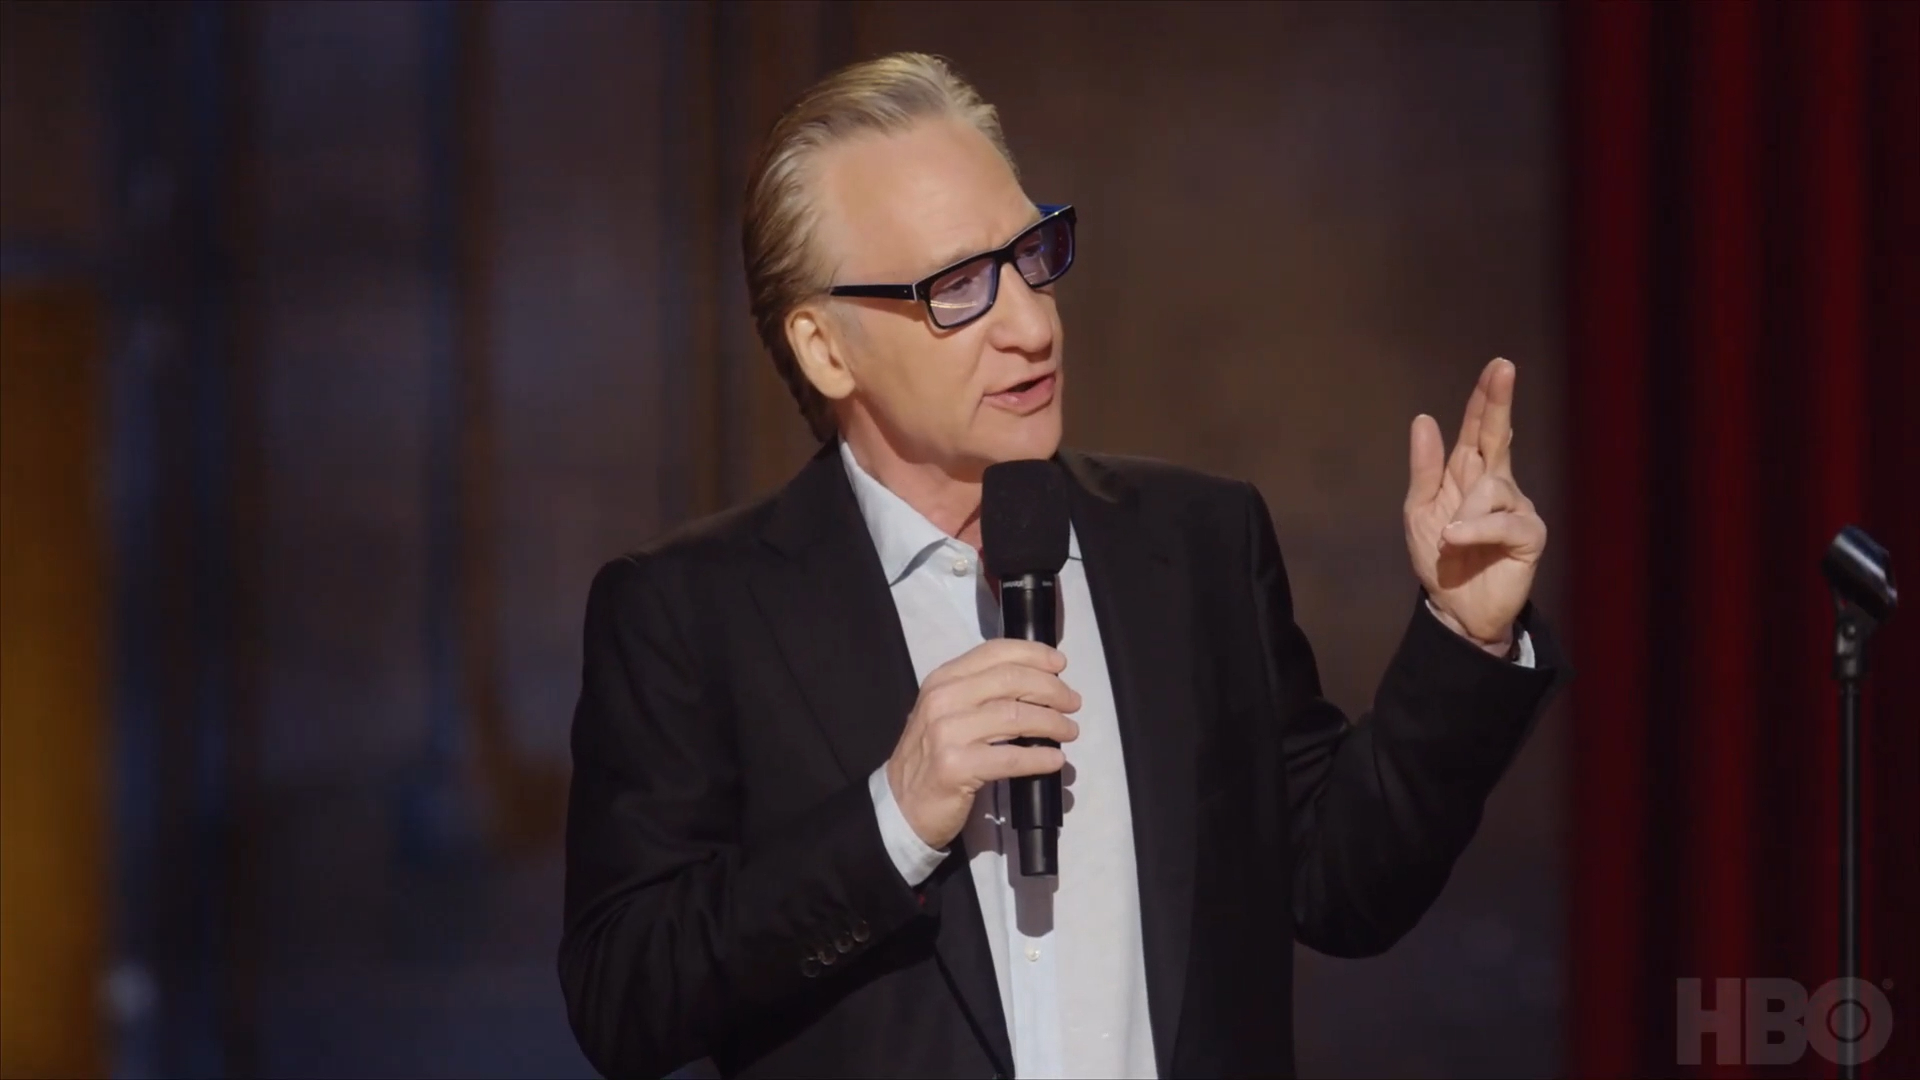 Watch Bill Maher: #Adulting